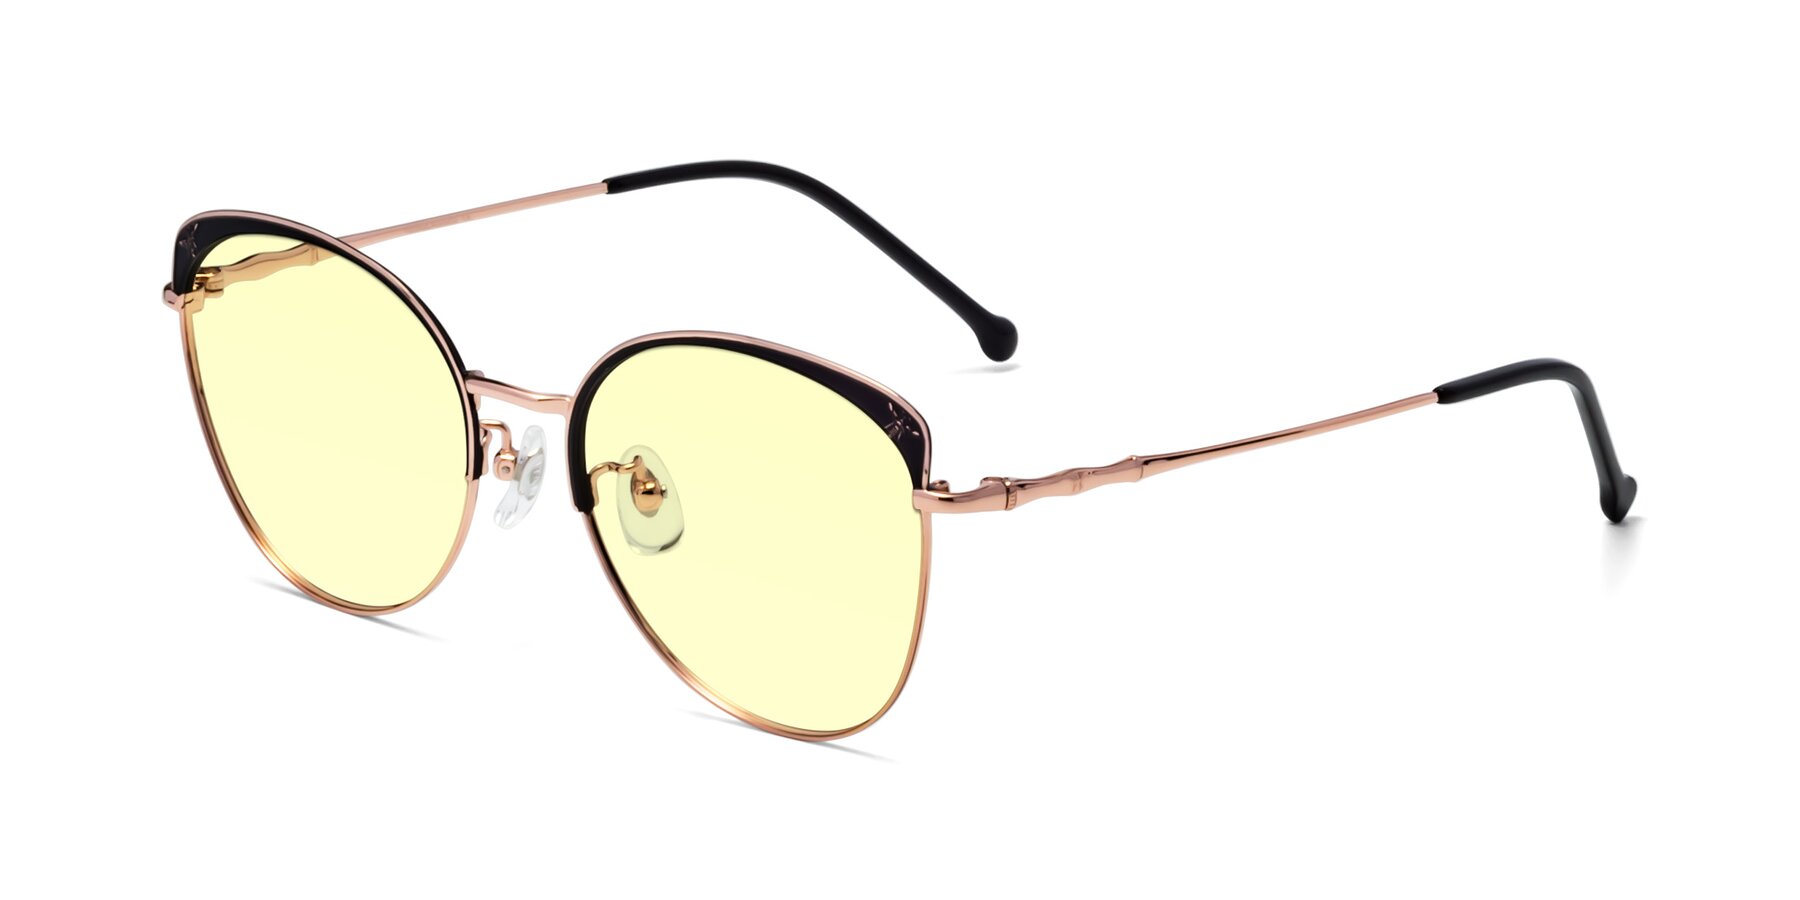 Angle of 18019 in Black-Rose Gold with Light Yellow Tinted Lenses